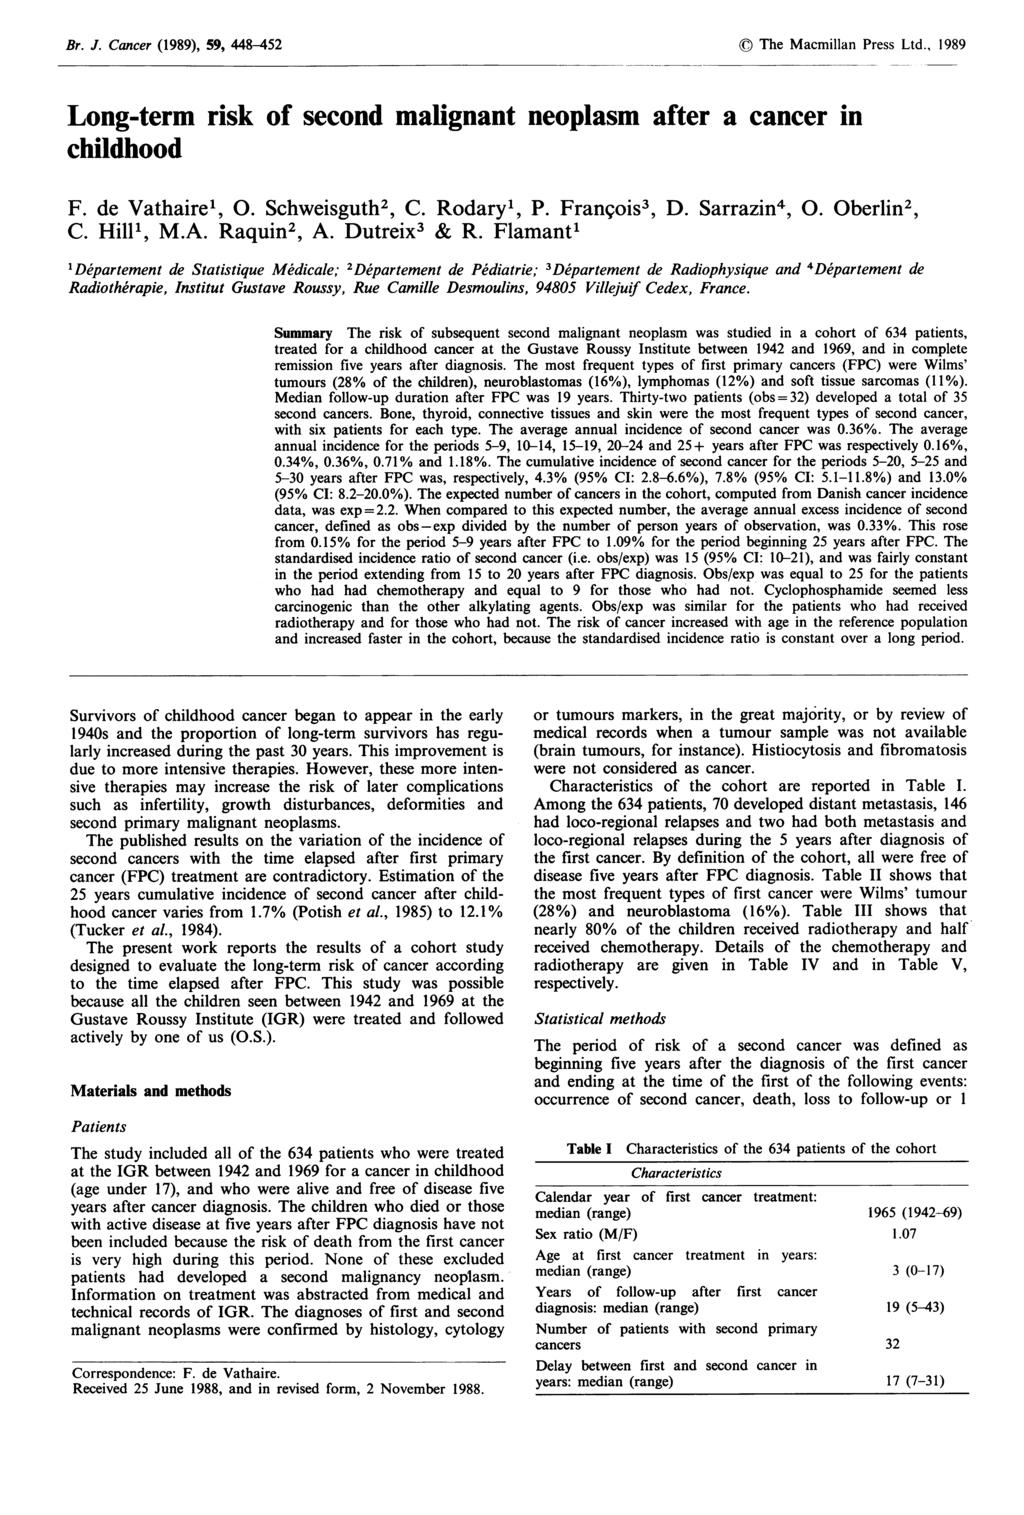 Br. J. Cancer (1989), 59, 448-452 The Macmillan Press Ltd., 1989 Long-term risk of second malignant neoplasm after childhood a cancer in F. de Vathairel, 0. Schweisguth2, C. Rodaryl, P. Fran9ois3, D.